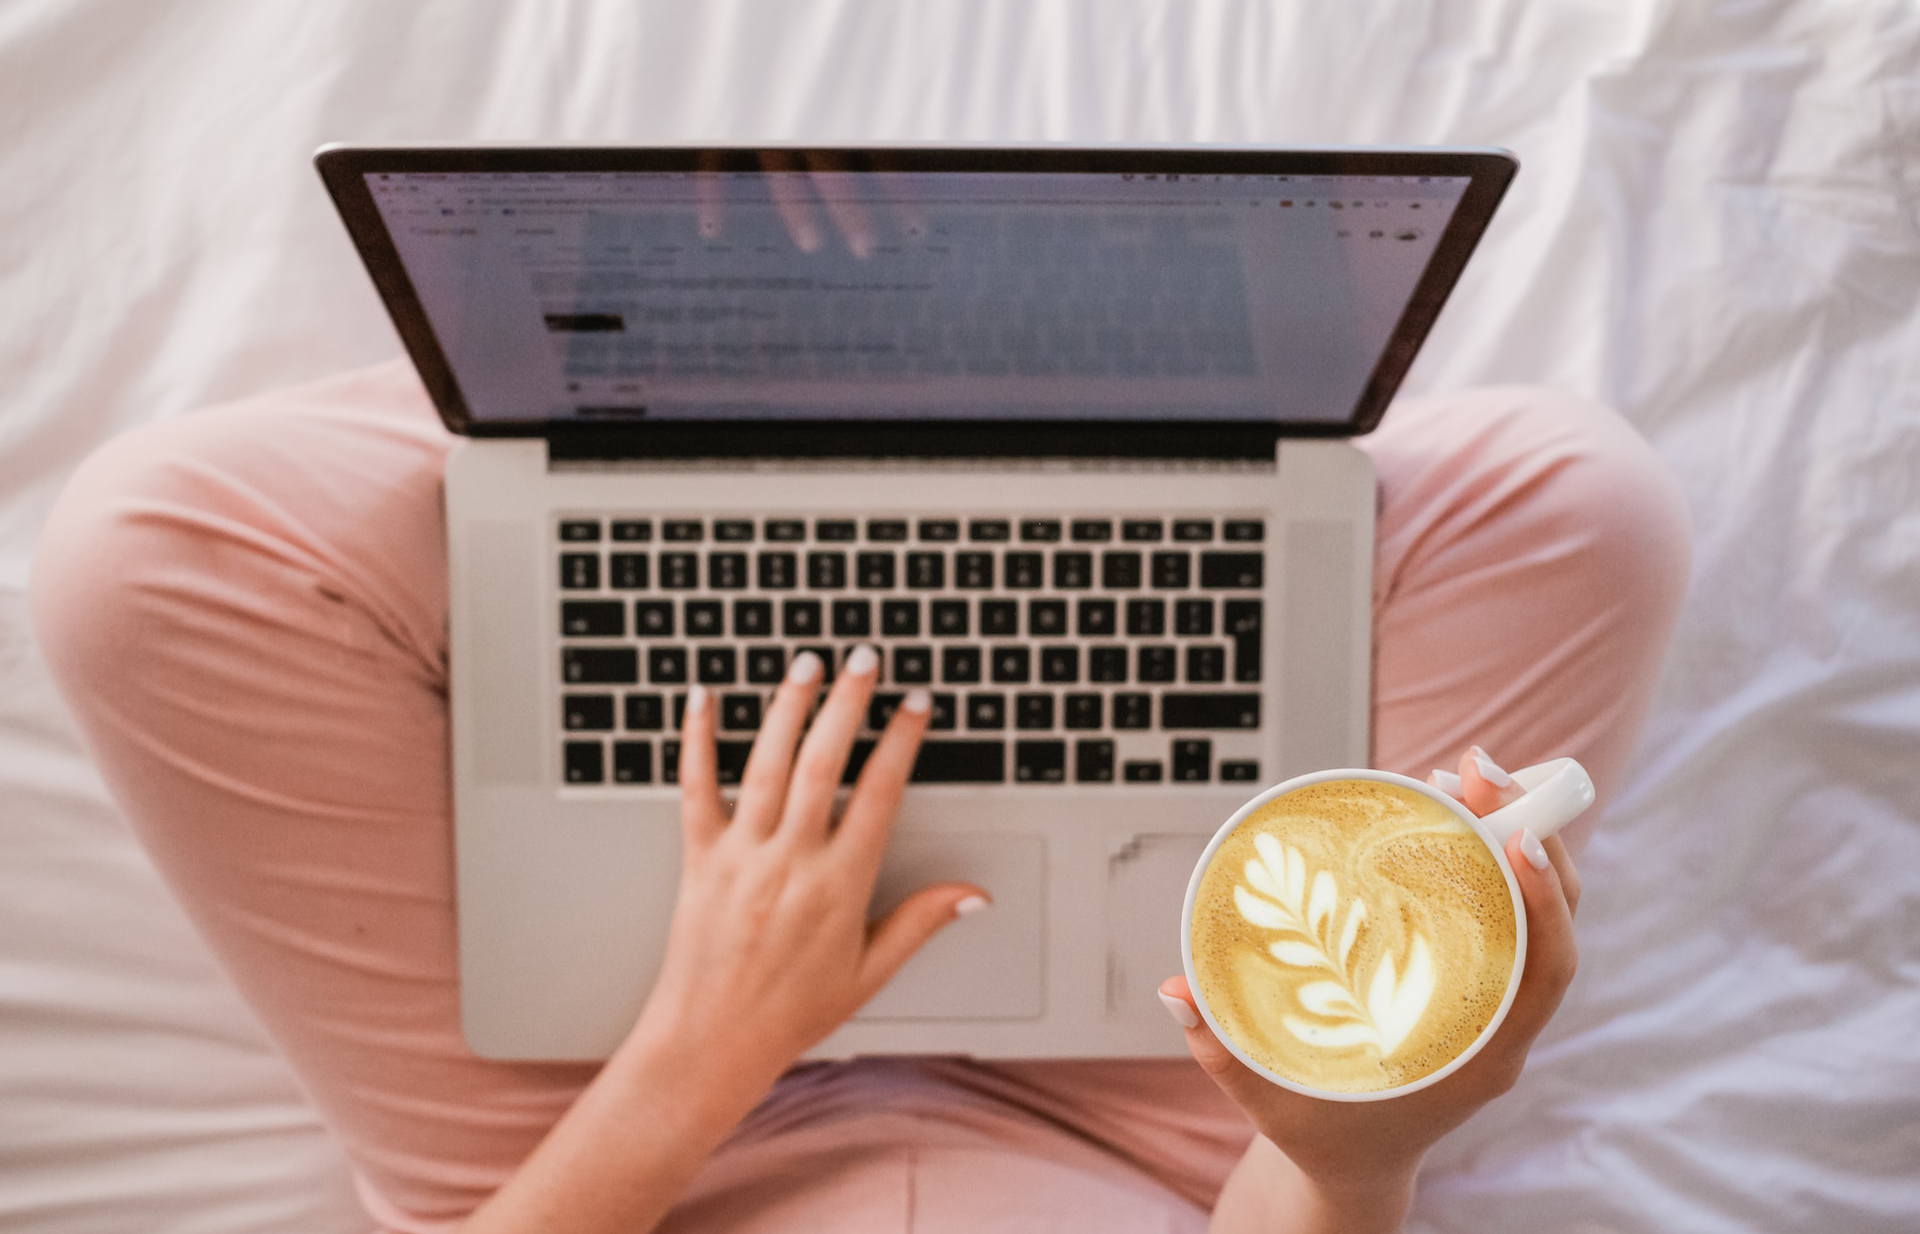 a top-down view of a woman typing on a laptop, with the laptop on her lap sitting cross legged on white sheets, holding a latte with leaf foam art